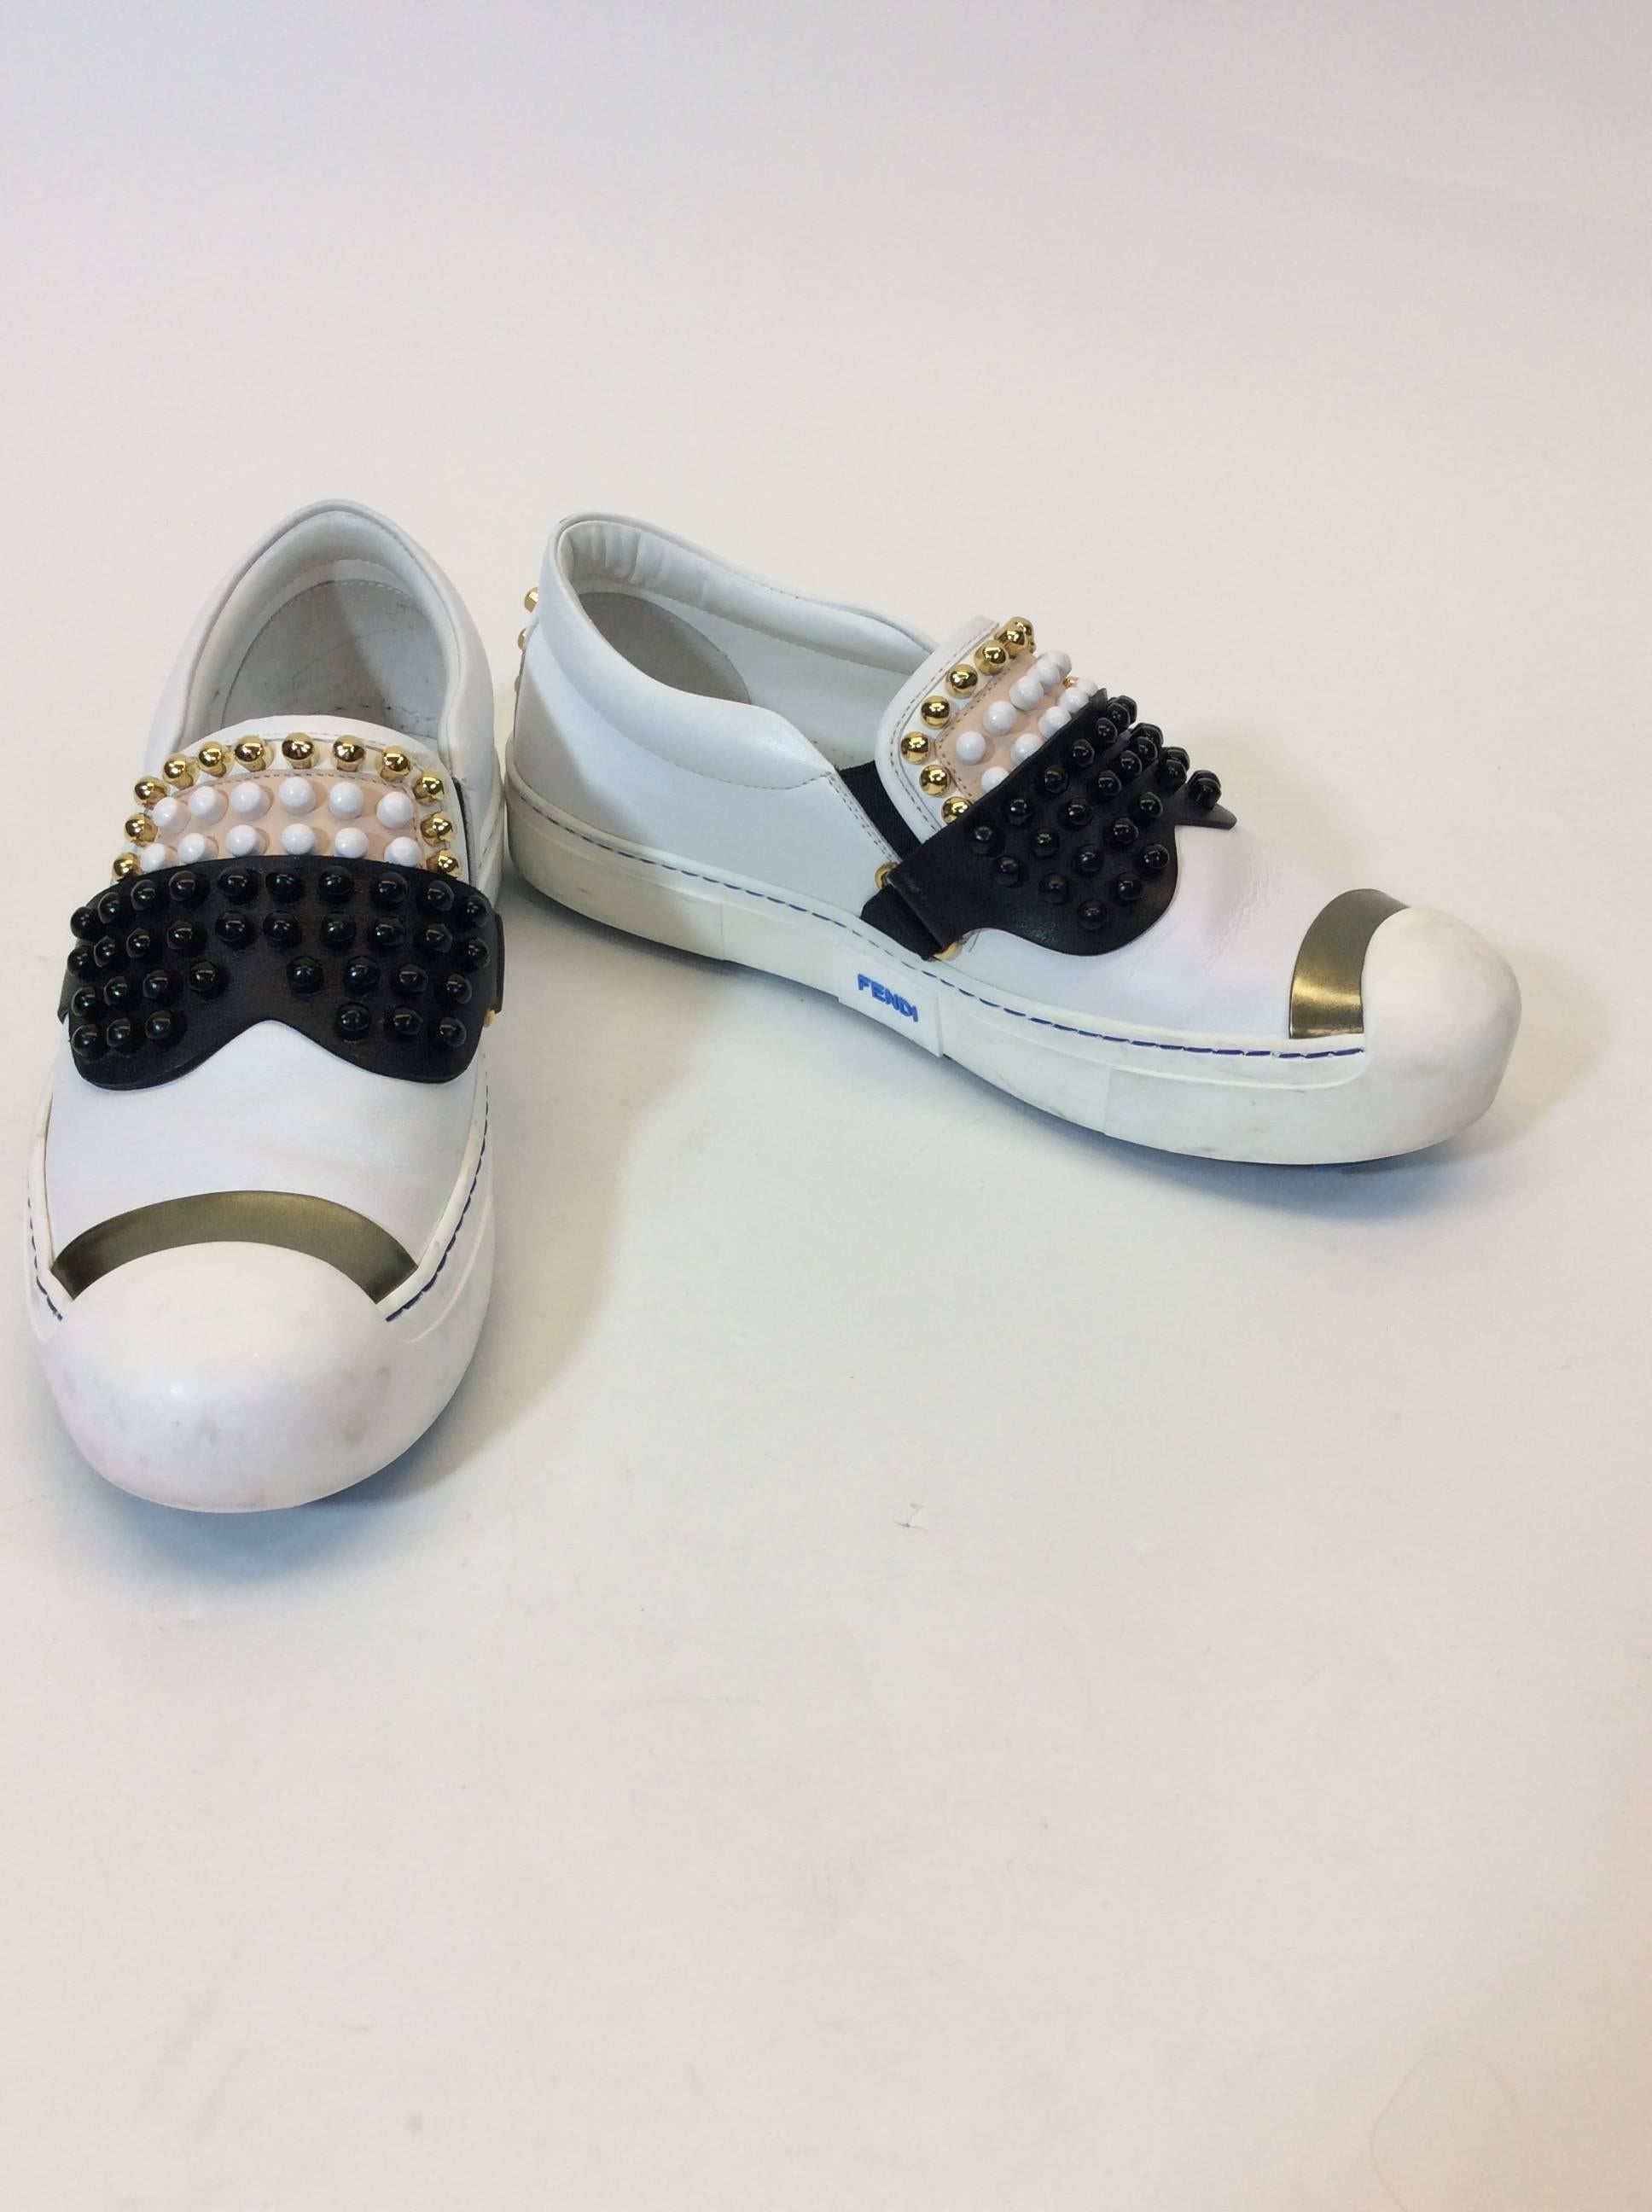 White and Black Fendi 'Karl' 
Studded Leather Sneakers 
Black, White and Goldstone Studs Along top and back
Slip-on shoes
Round toe with chrome Piece
Blue Pointed Sole 3.5" Inches 
'Karl loves Fendi' print
100% Calf Leather